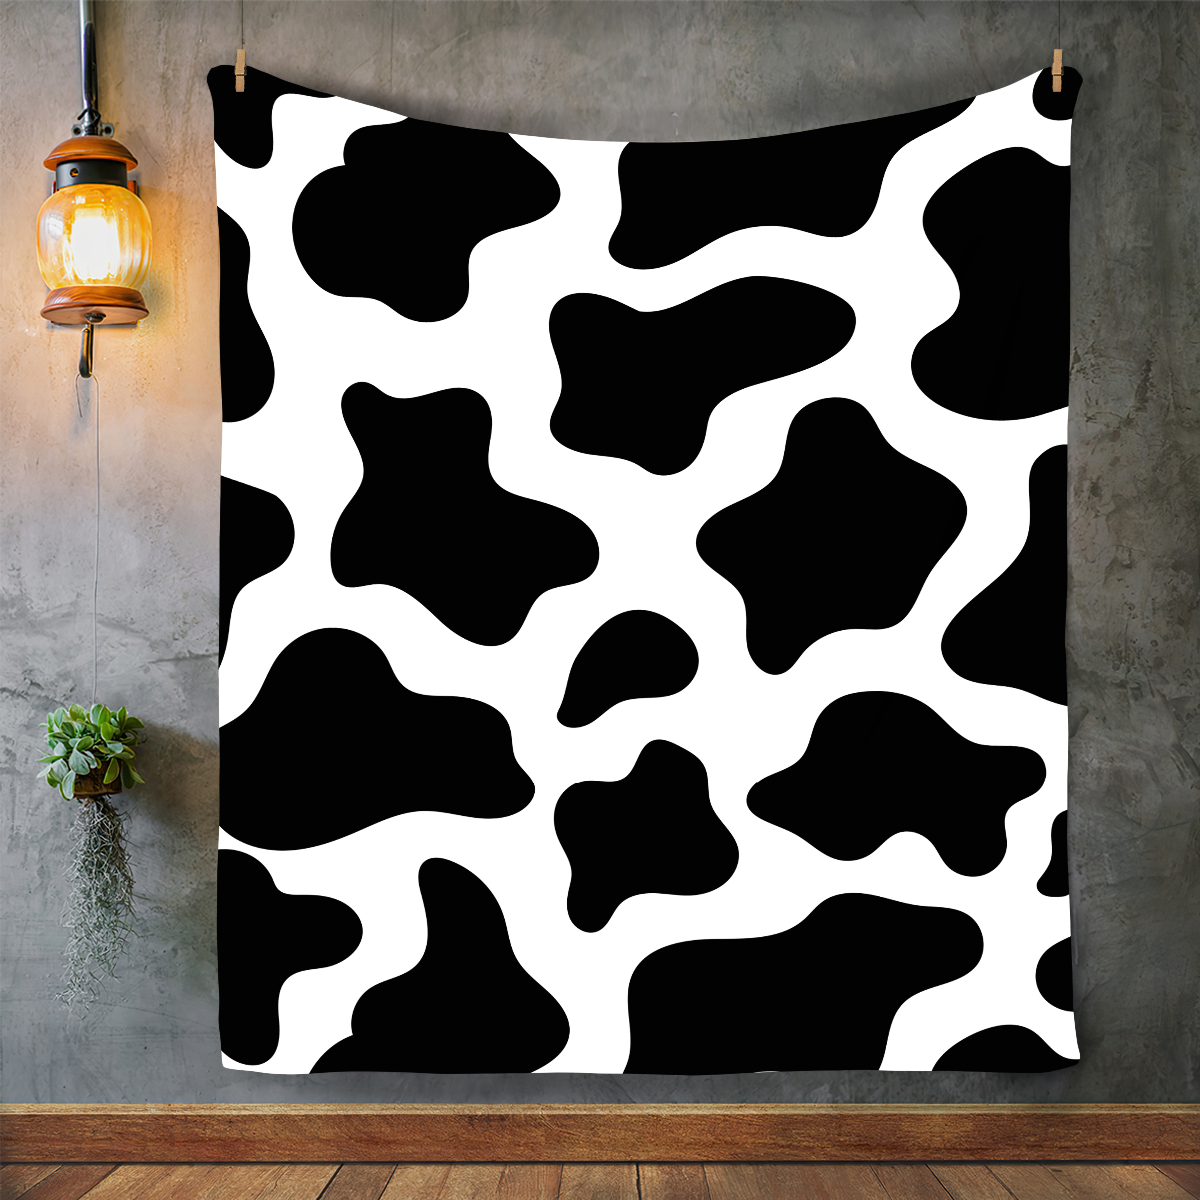 Black and White Cow Print Soft Cozy Blanket